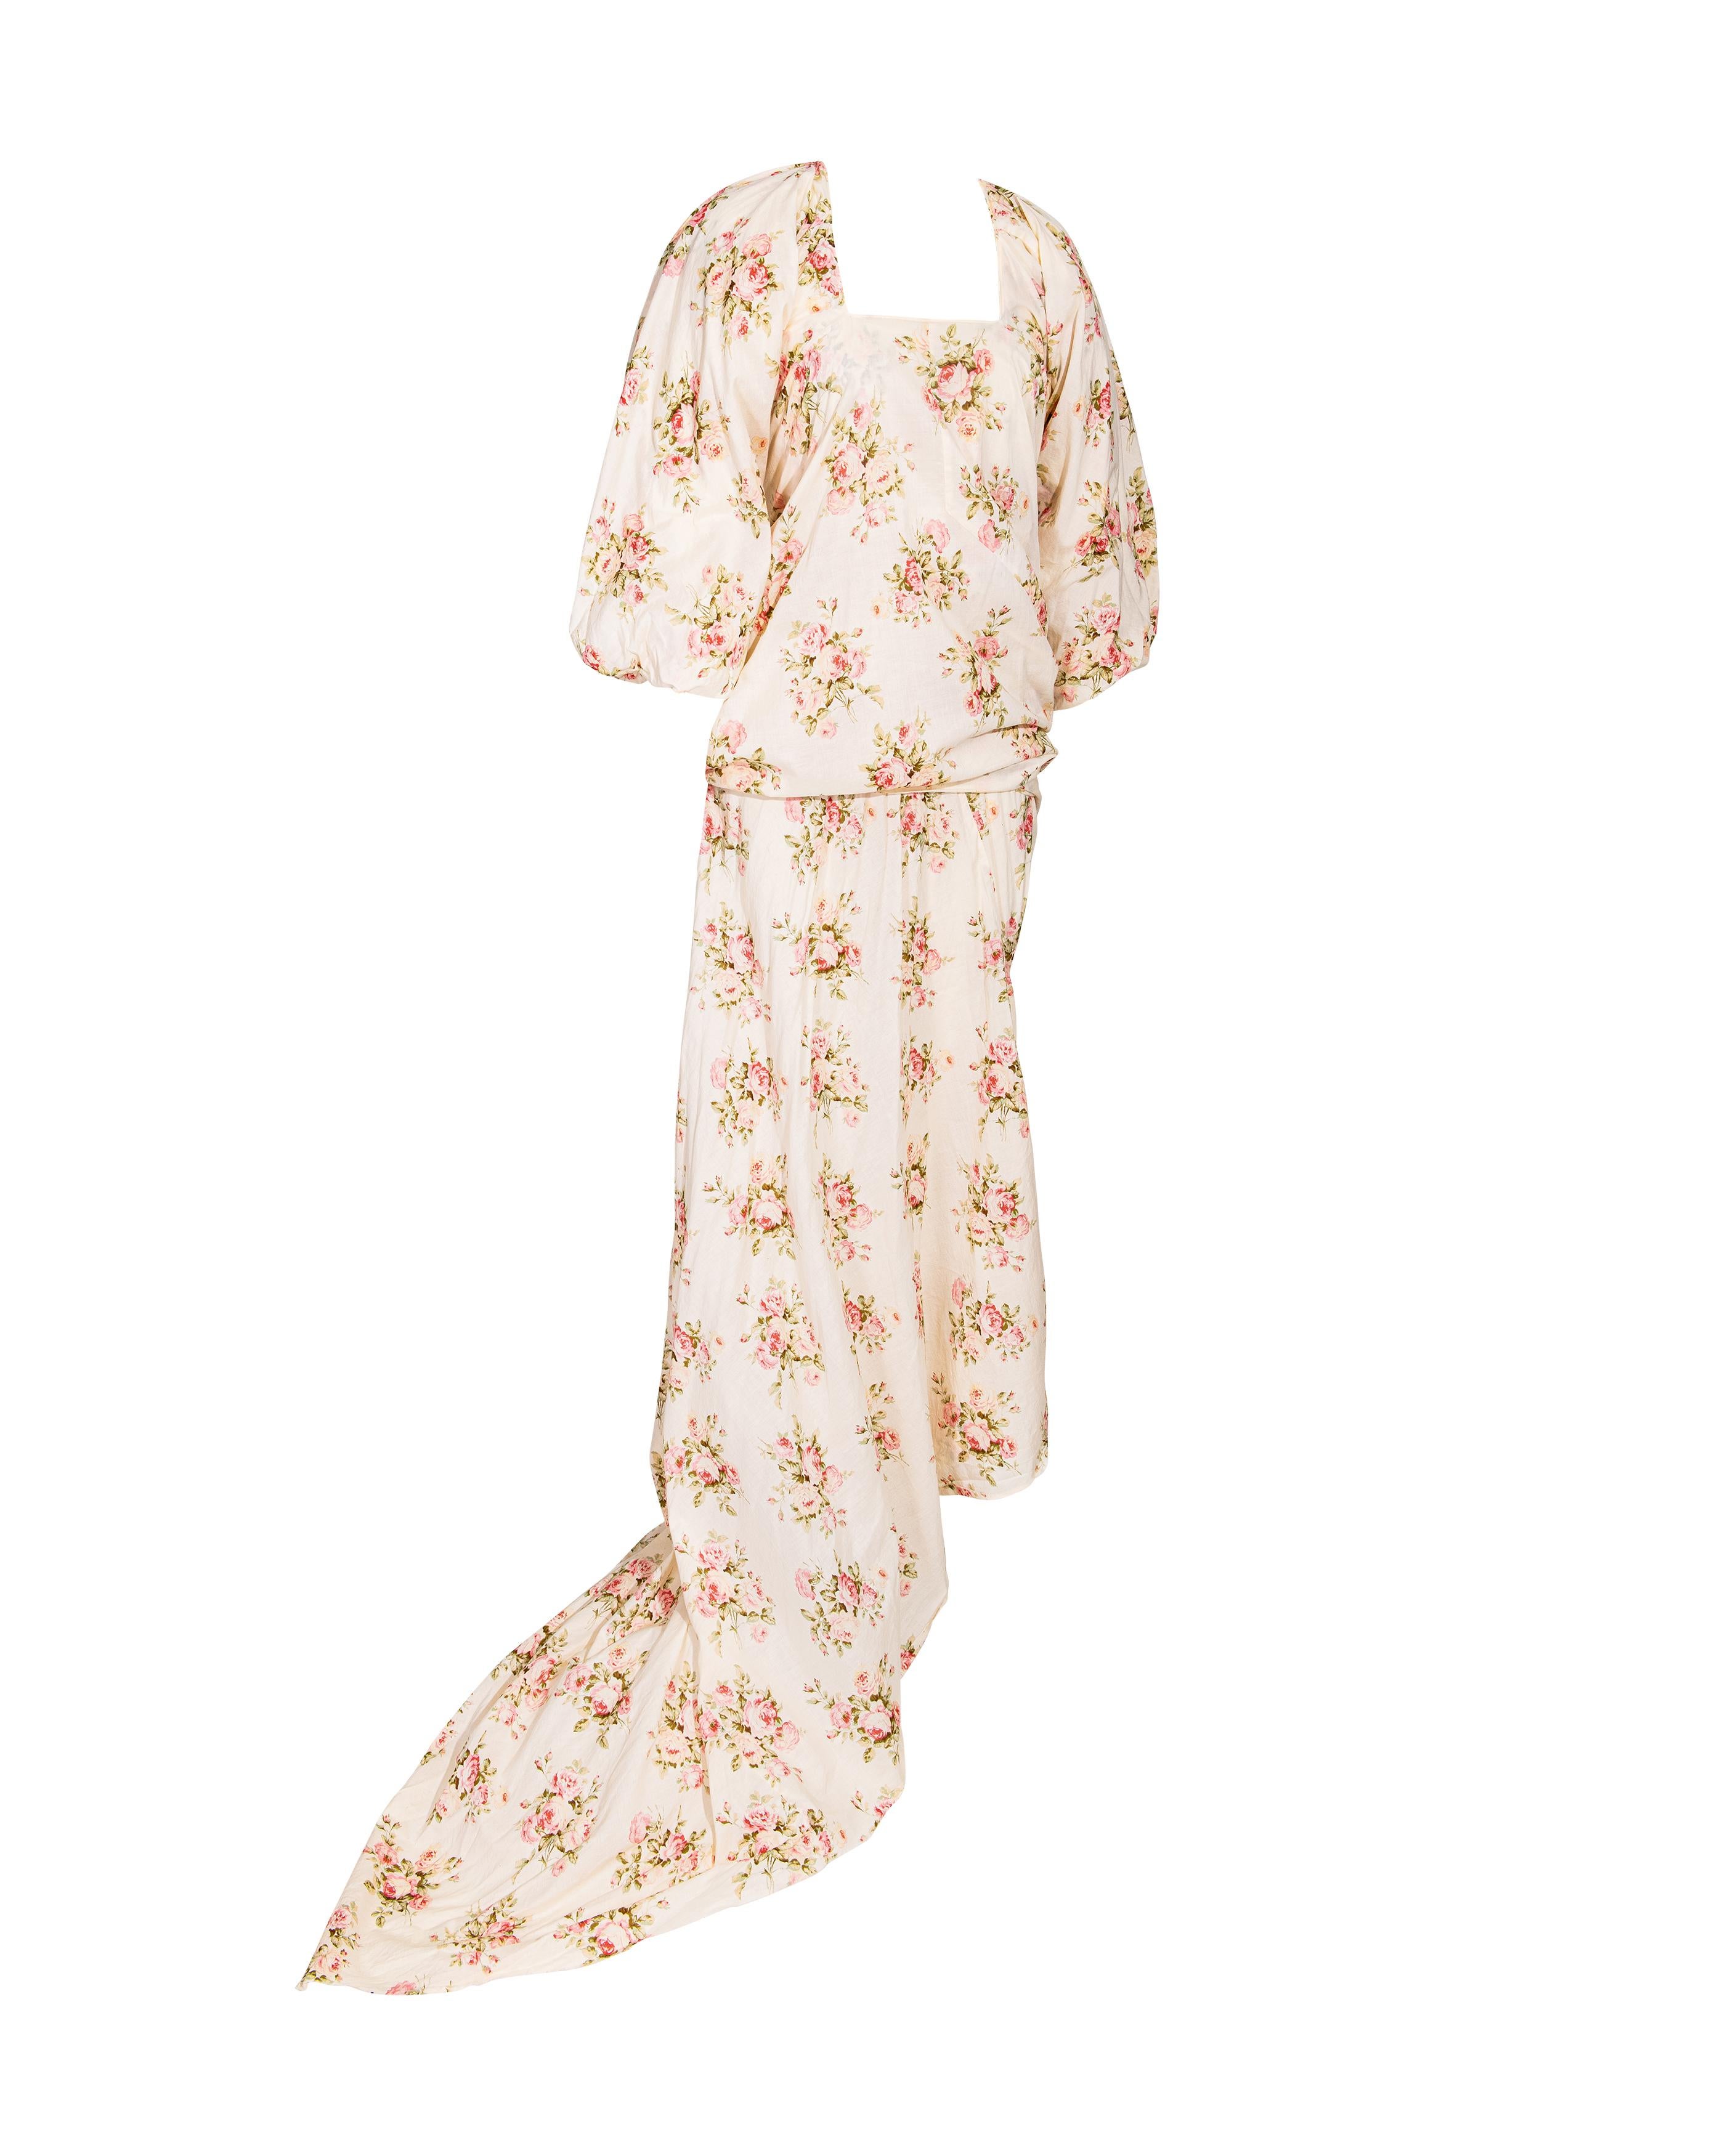 S/S 2008 Junya Watanabe Ecru Cotton Dress with Pink Floral Pattern In Excellent Condition In North Hollywood, CA